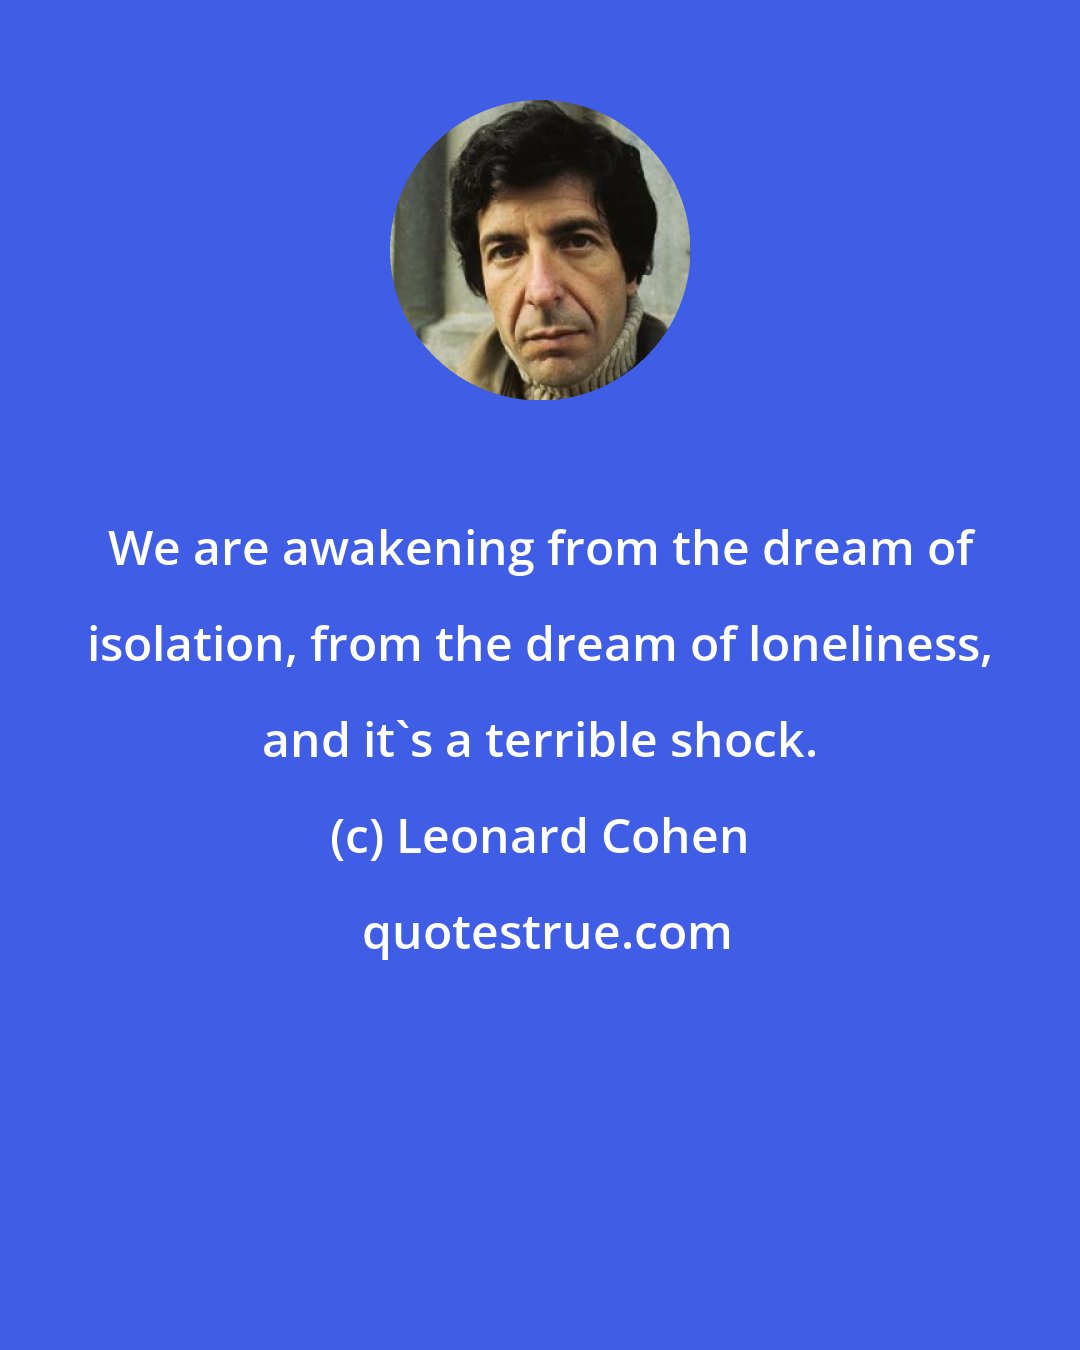 Leonard Cohen: We are awakening from the dream of isolation, from the dream of loneliness, and it's a terrible shock.